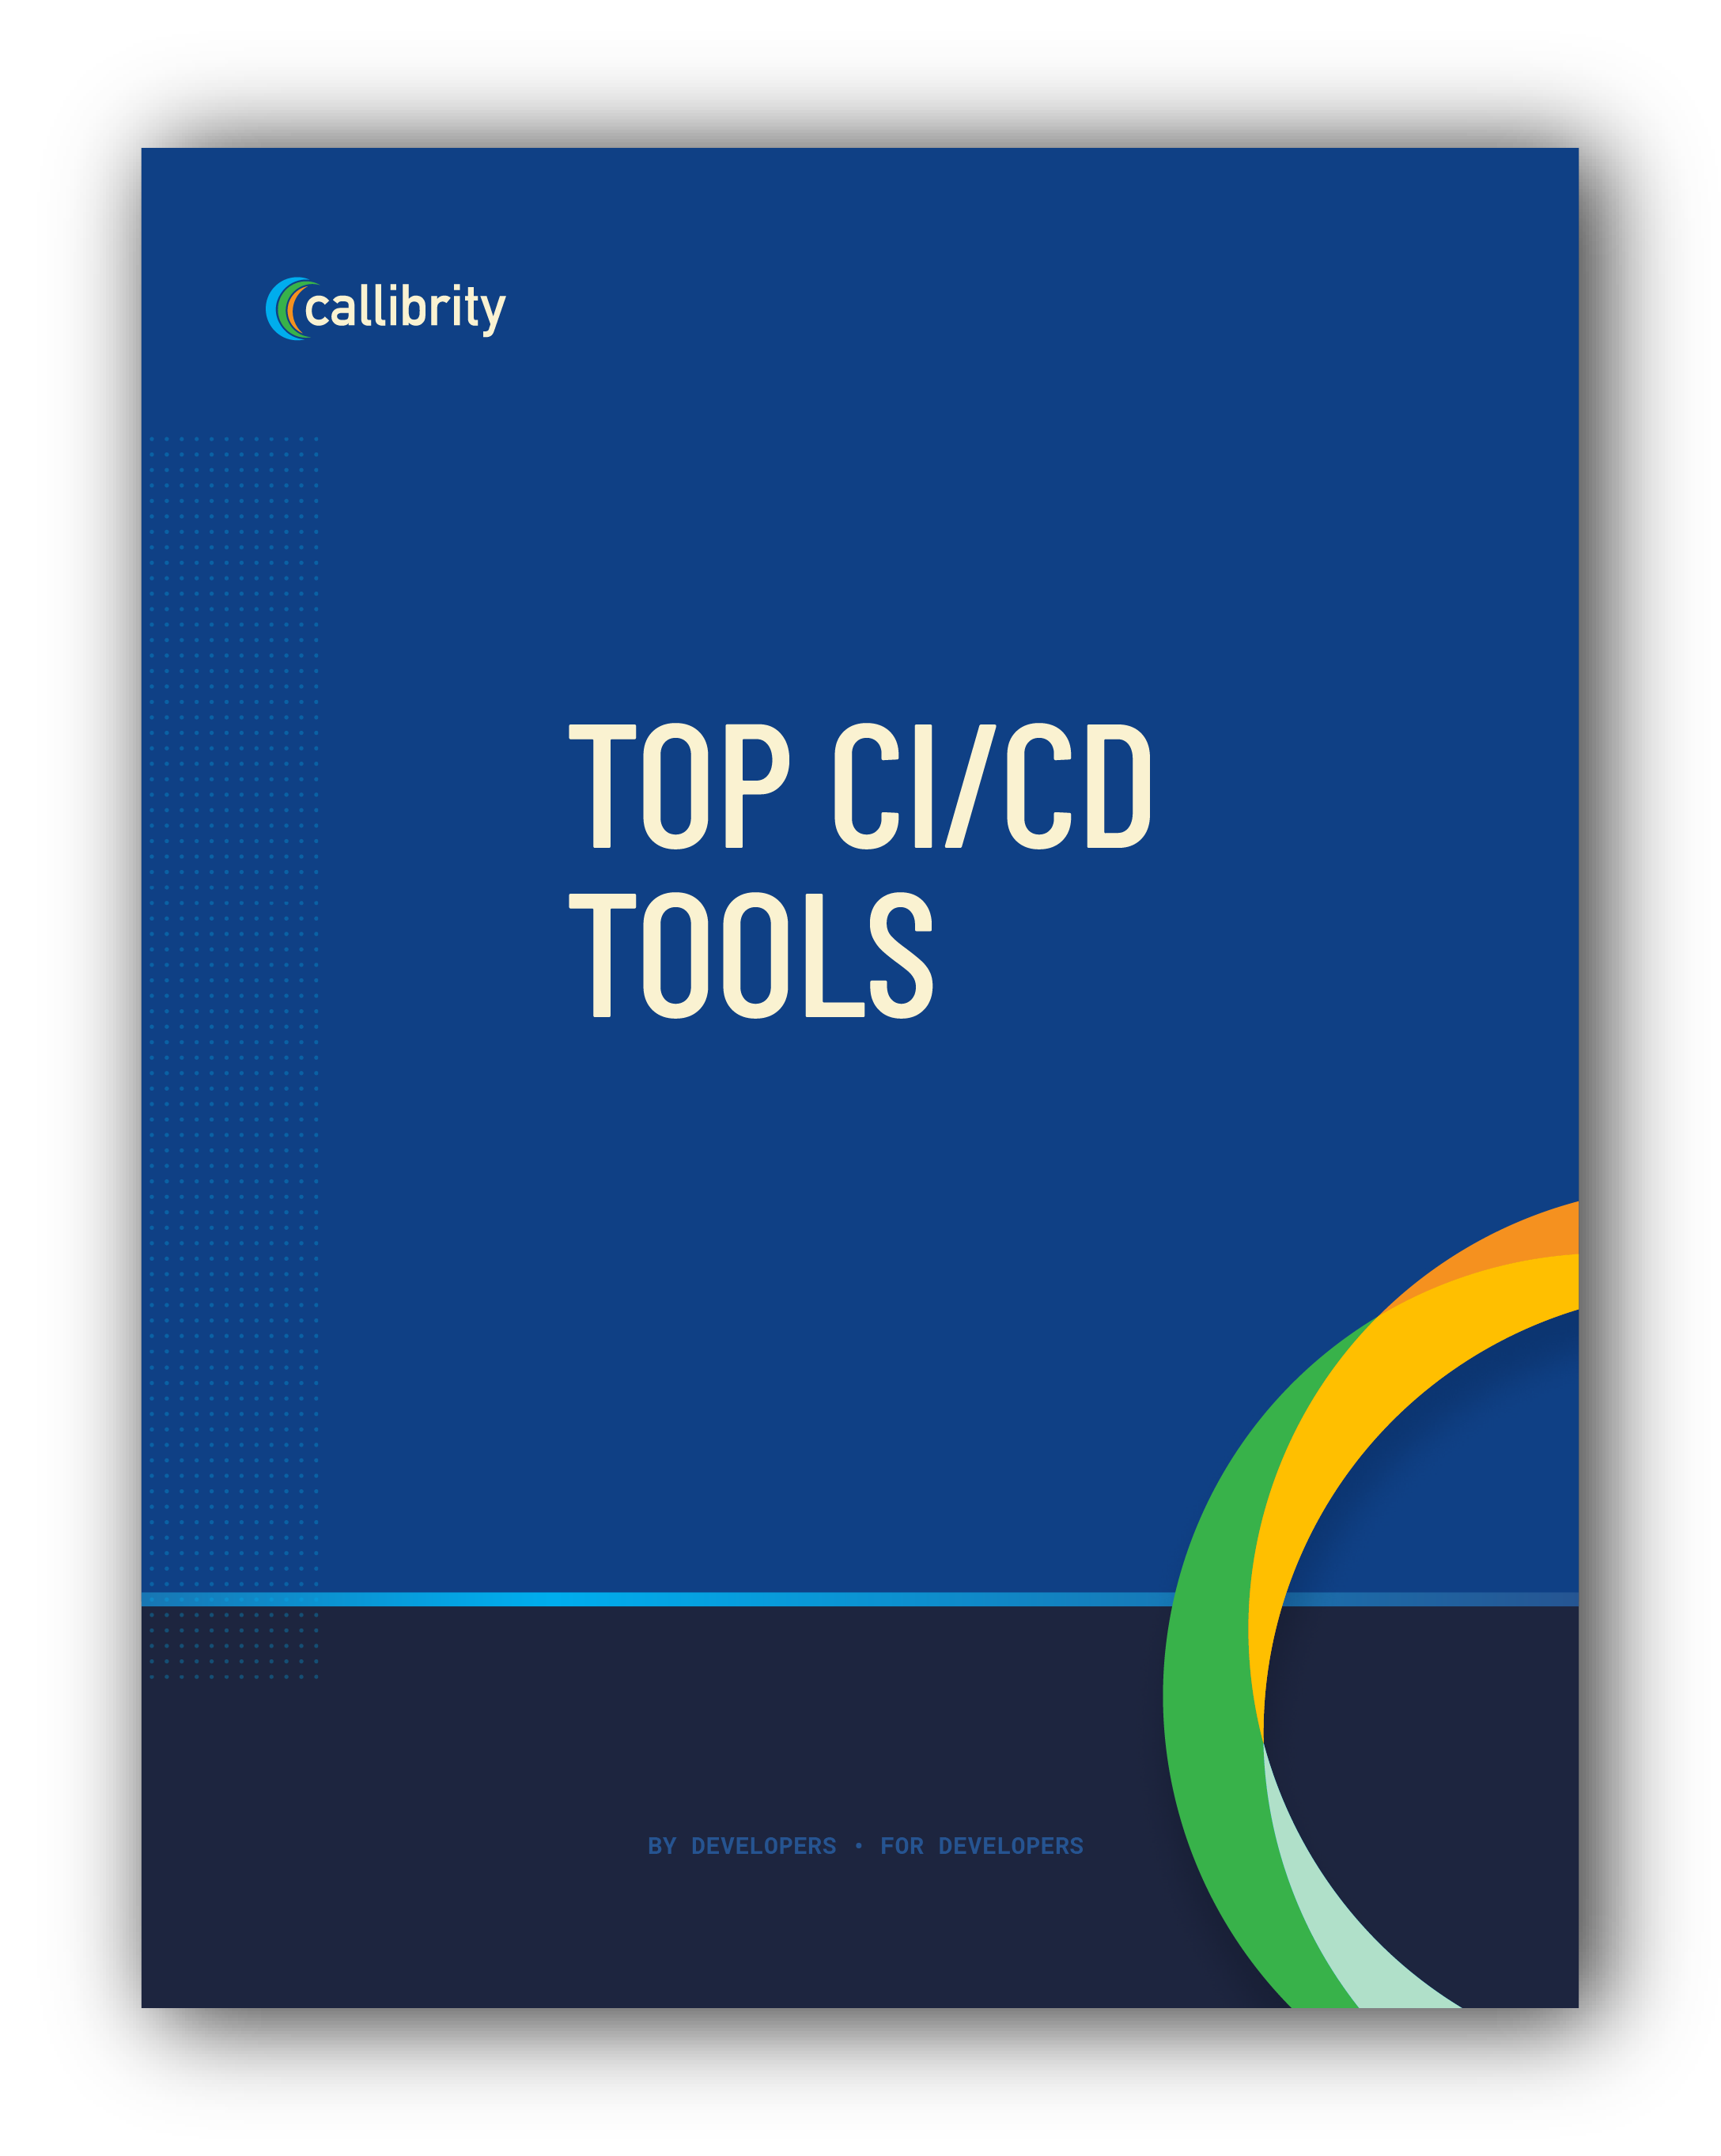 Top CICD Tools new cover-06